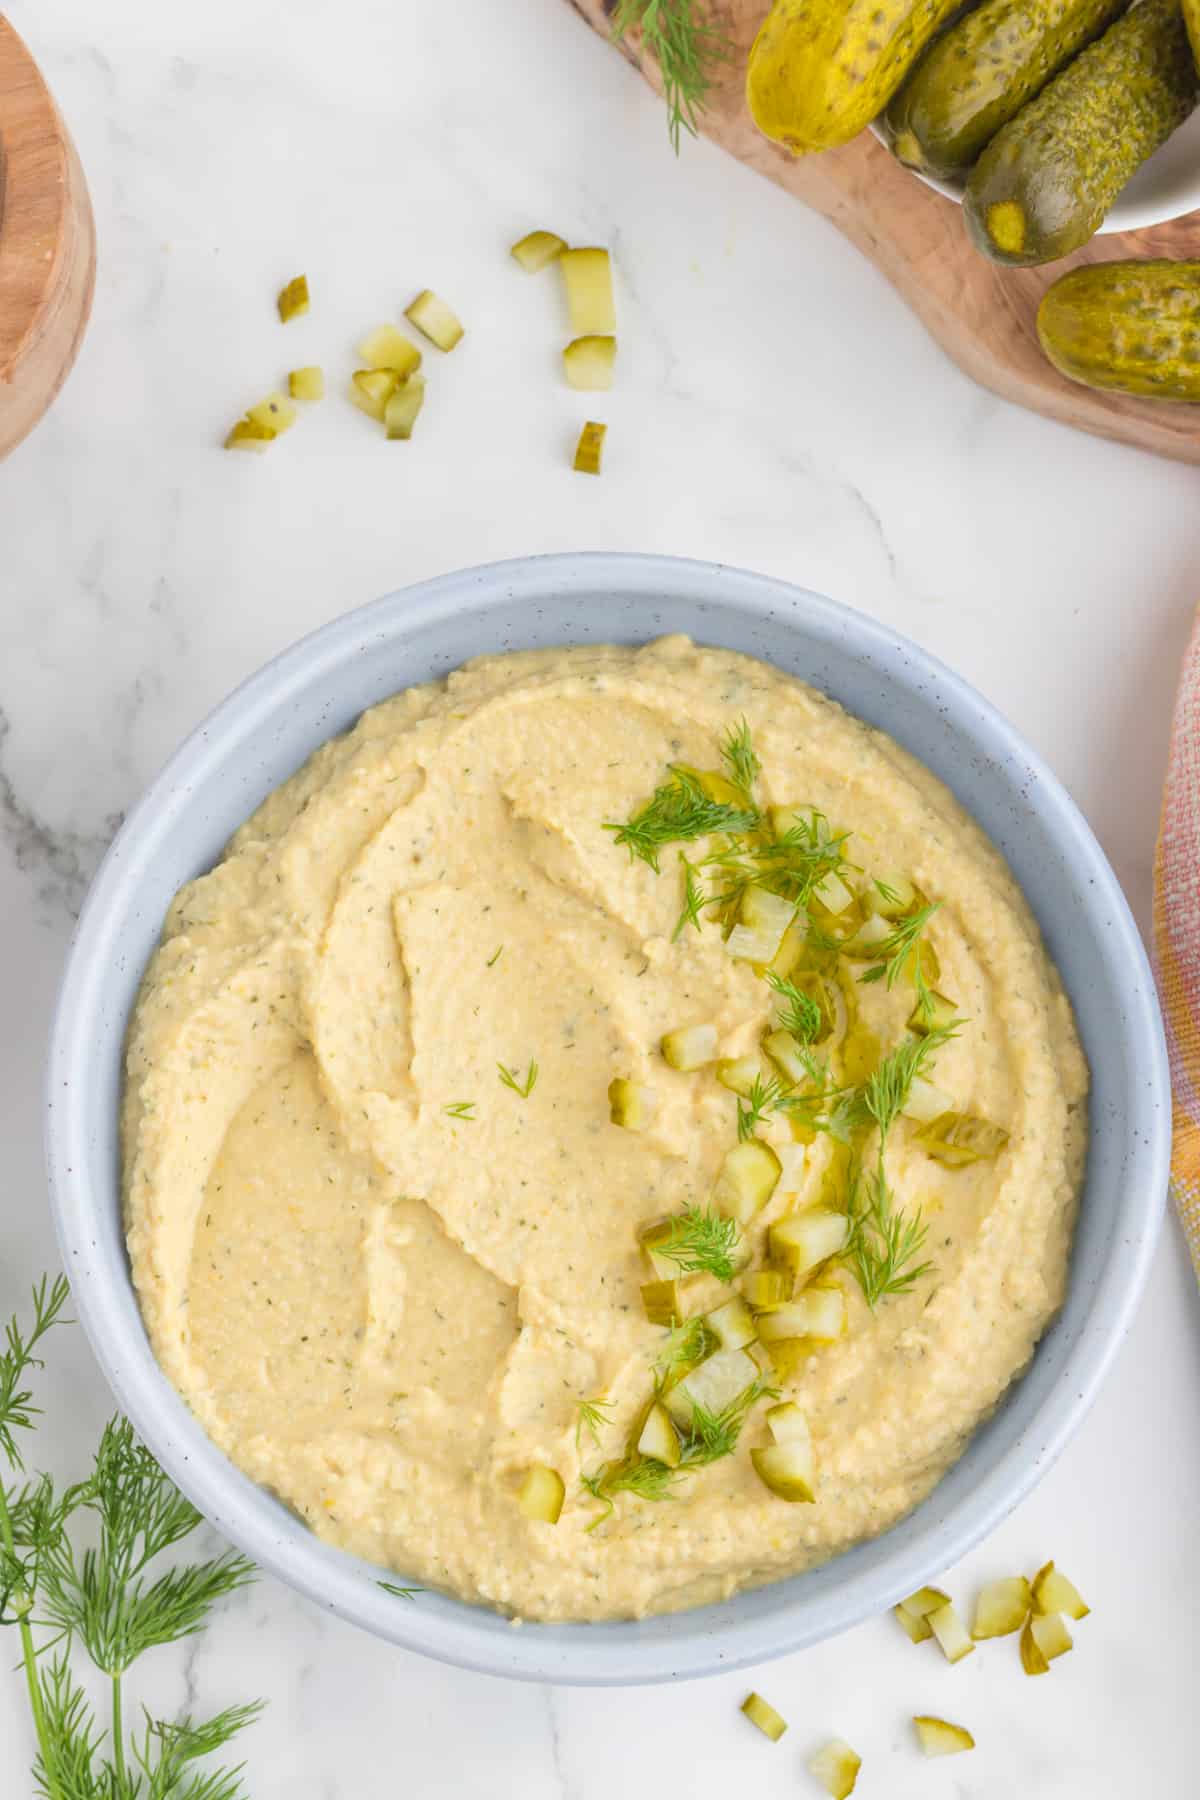 dill pickle hummus  serve in a blue bowl, top view